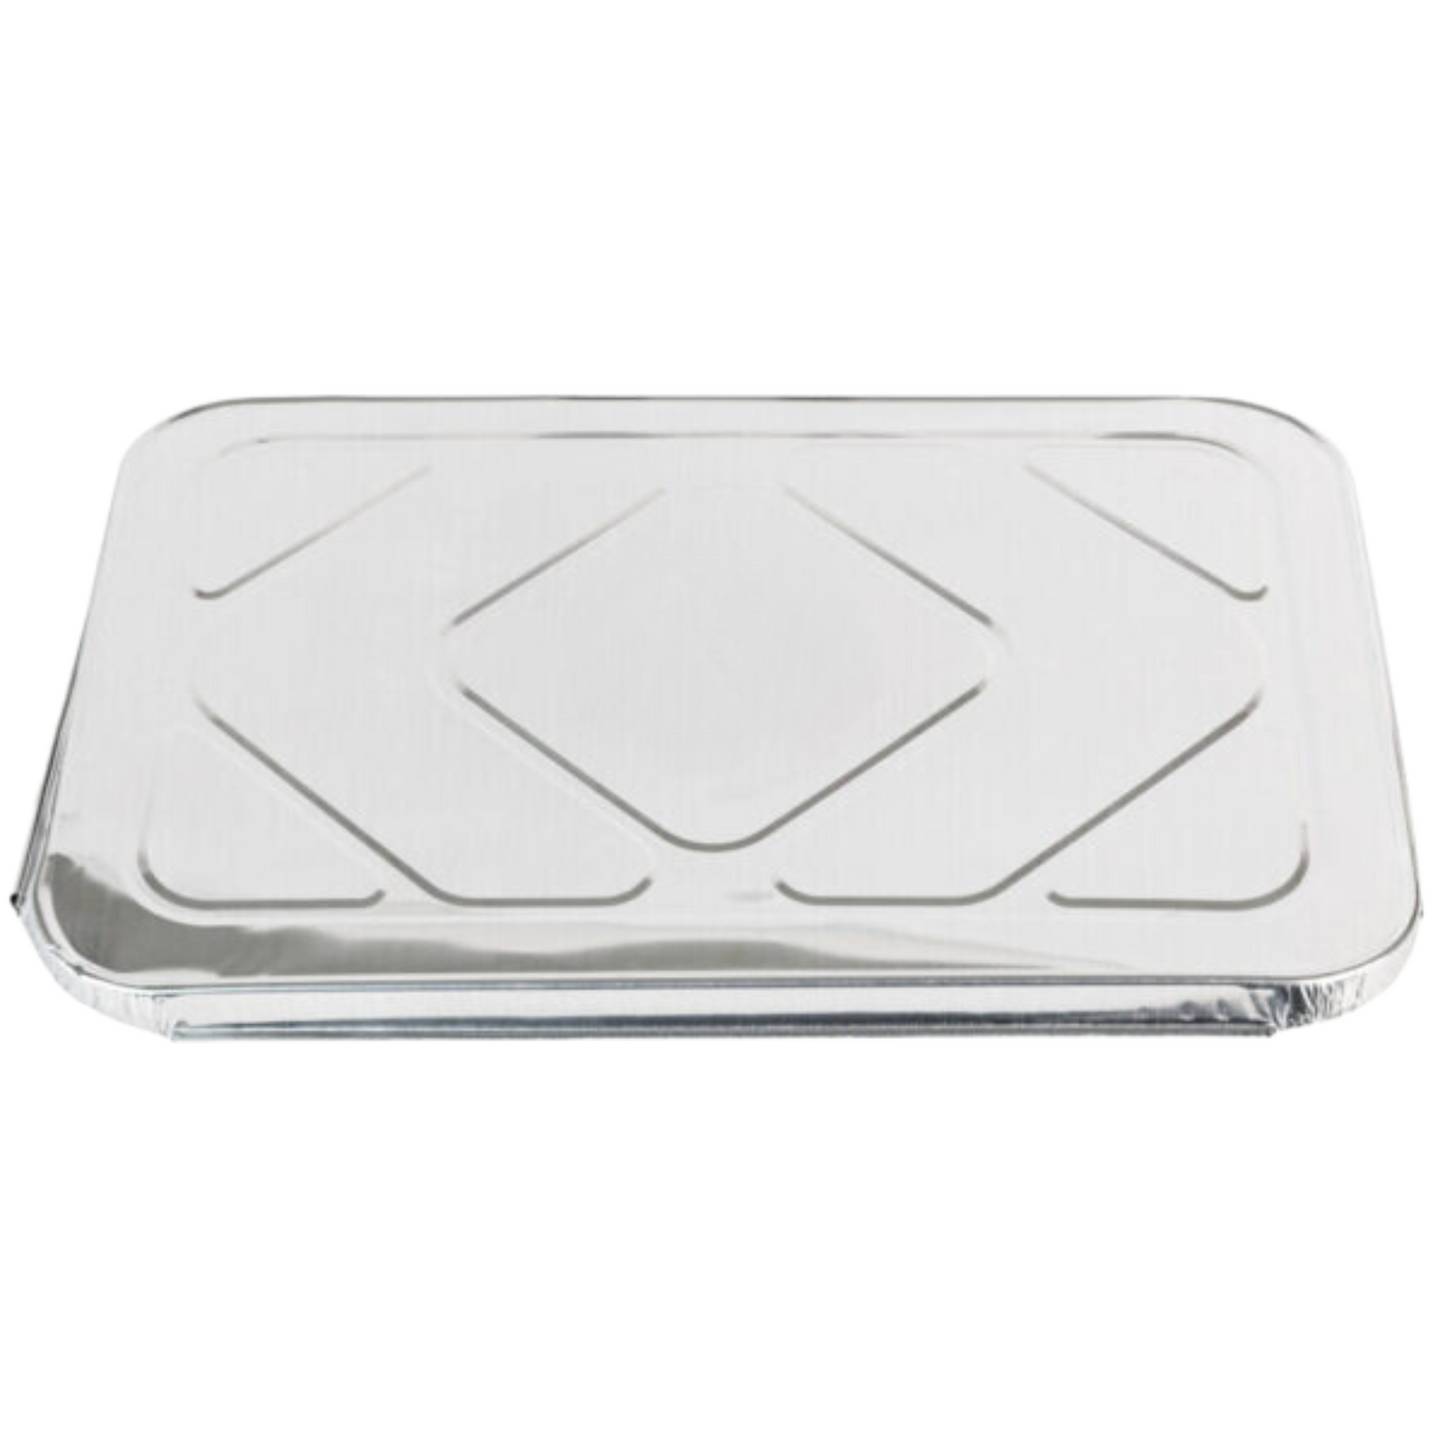 *WHOLESALE* Aluminum Half Size LID For 9x13 for All Weight Pans | 100 ct/case Disposable VeZee   